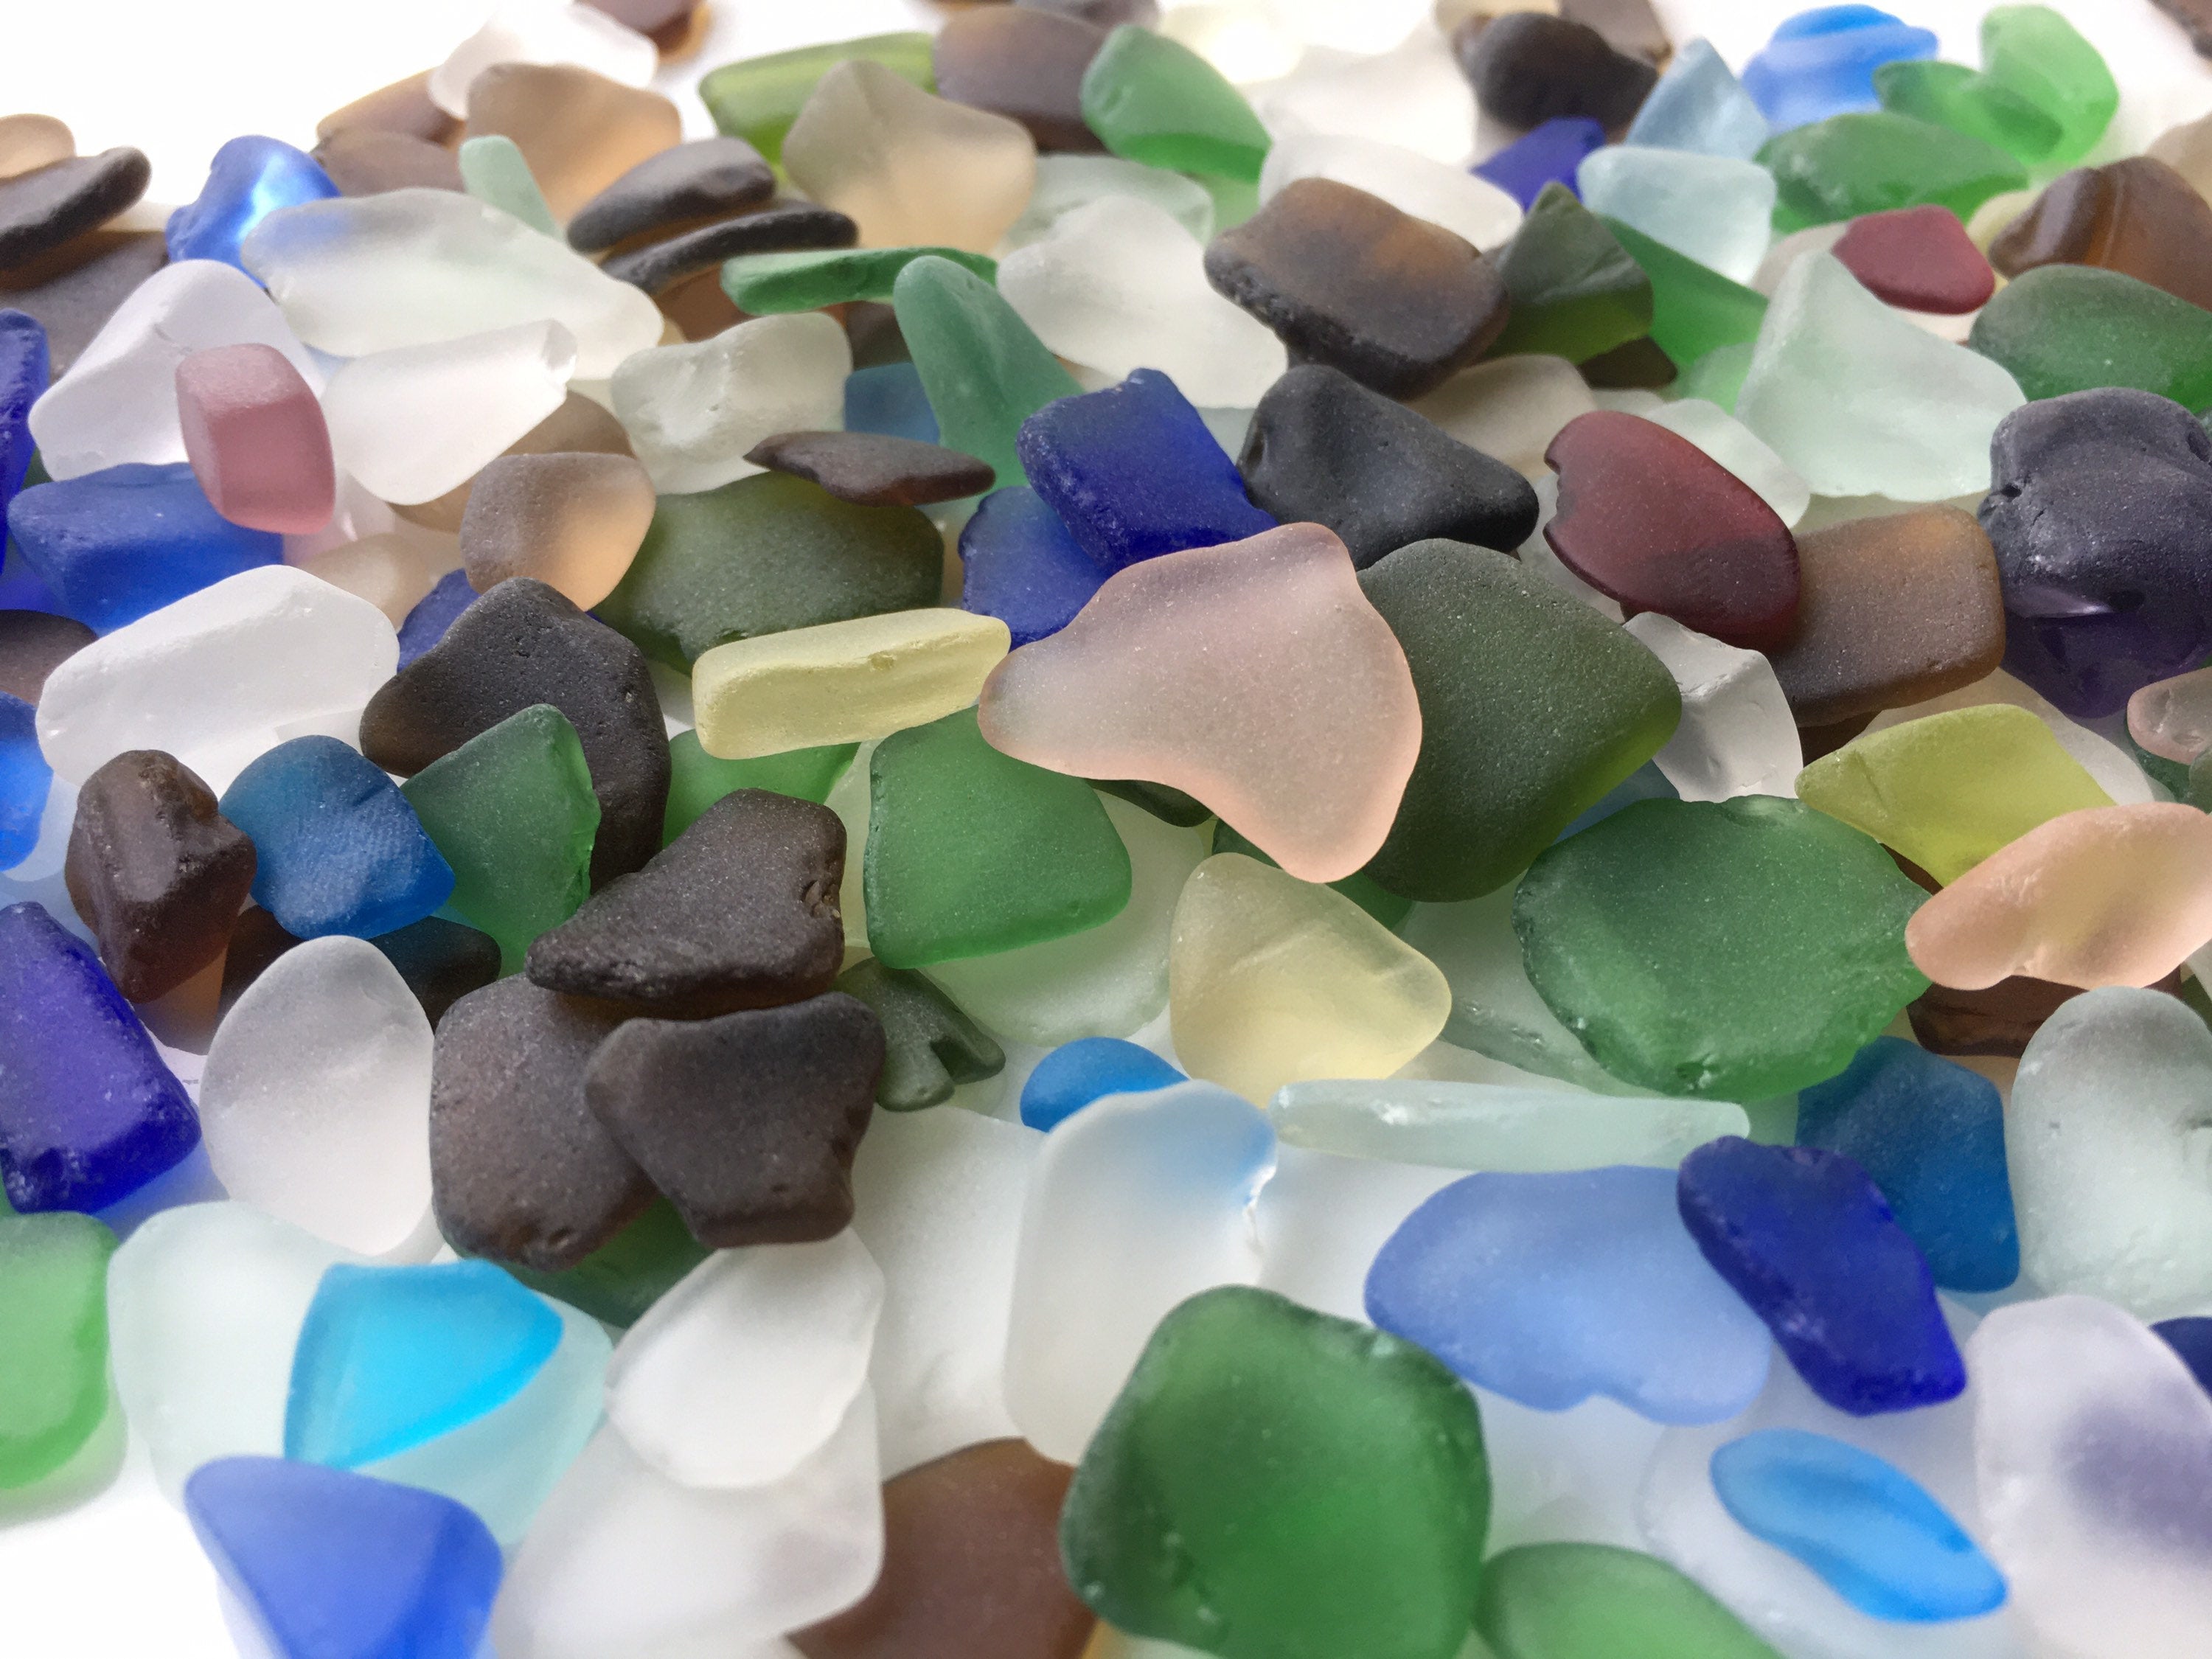 Quality Natural Sea Glass Bulk. Tiny & Extra Small Frosted Genuine Surf  Tumbled Spanish Sea Glass for Jewelry Art Crafts 0,5-1,5cm 0,20,6 